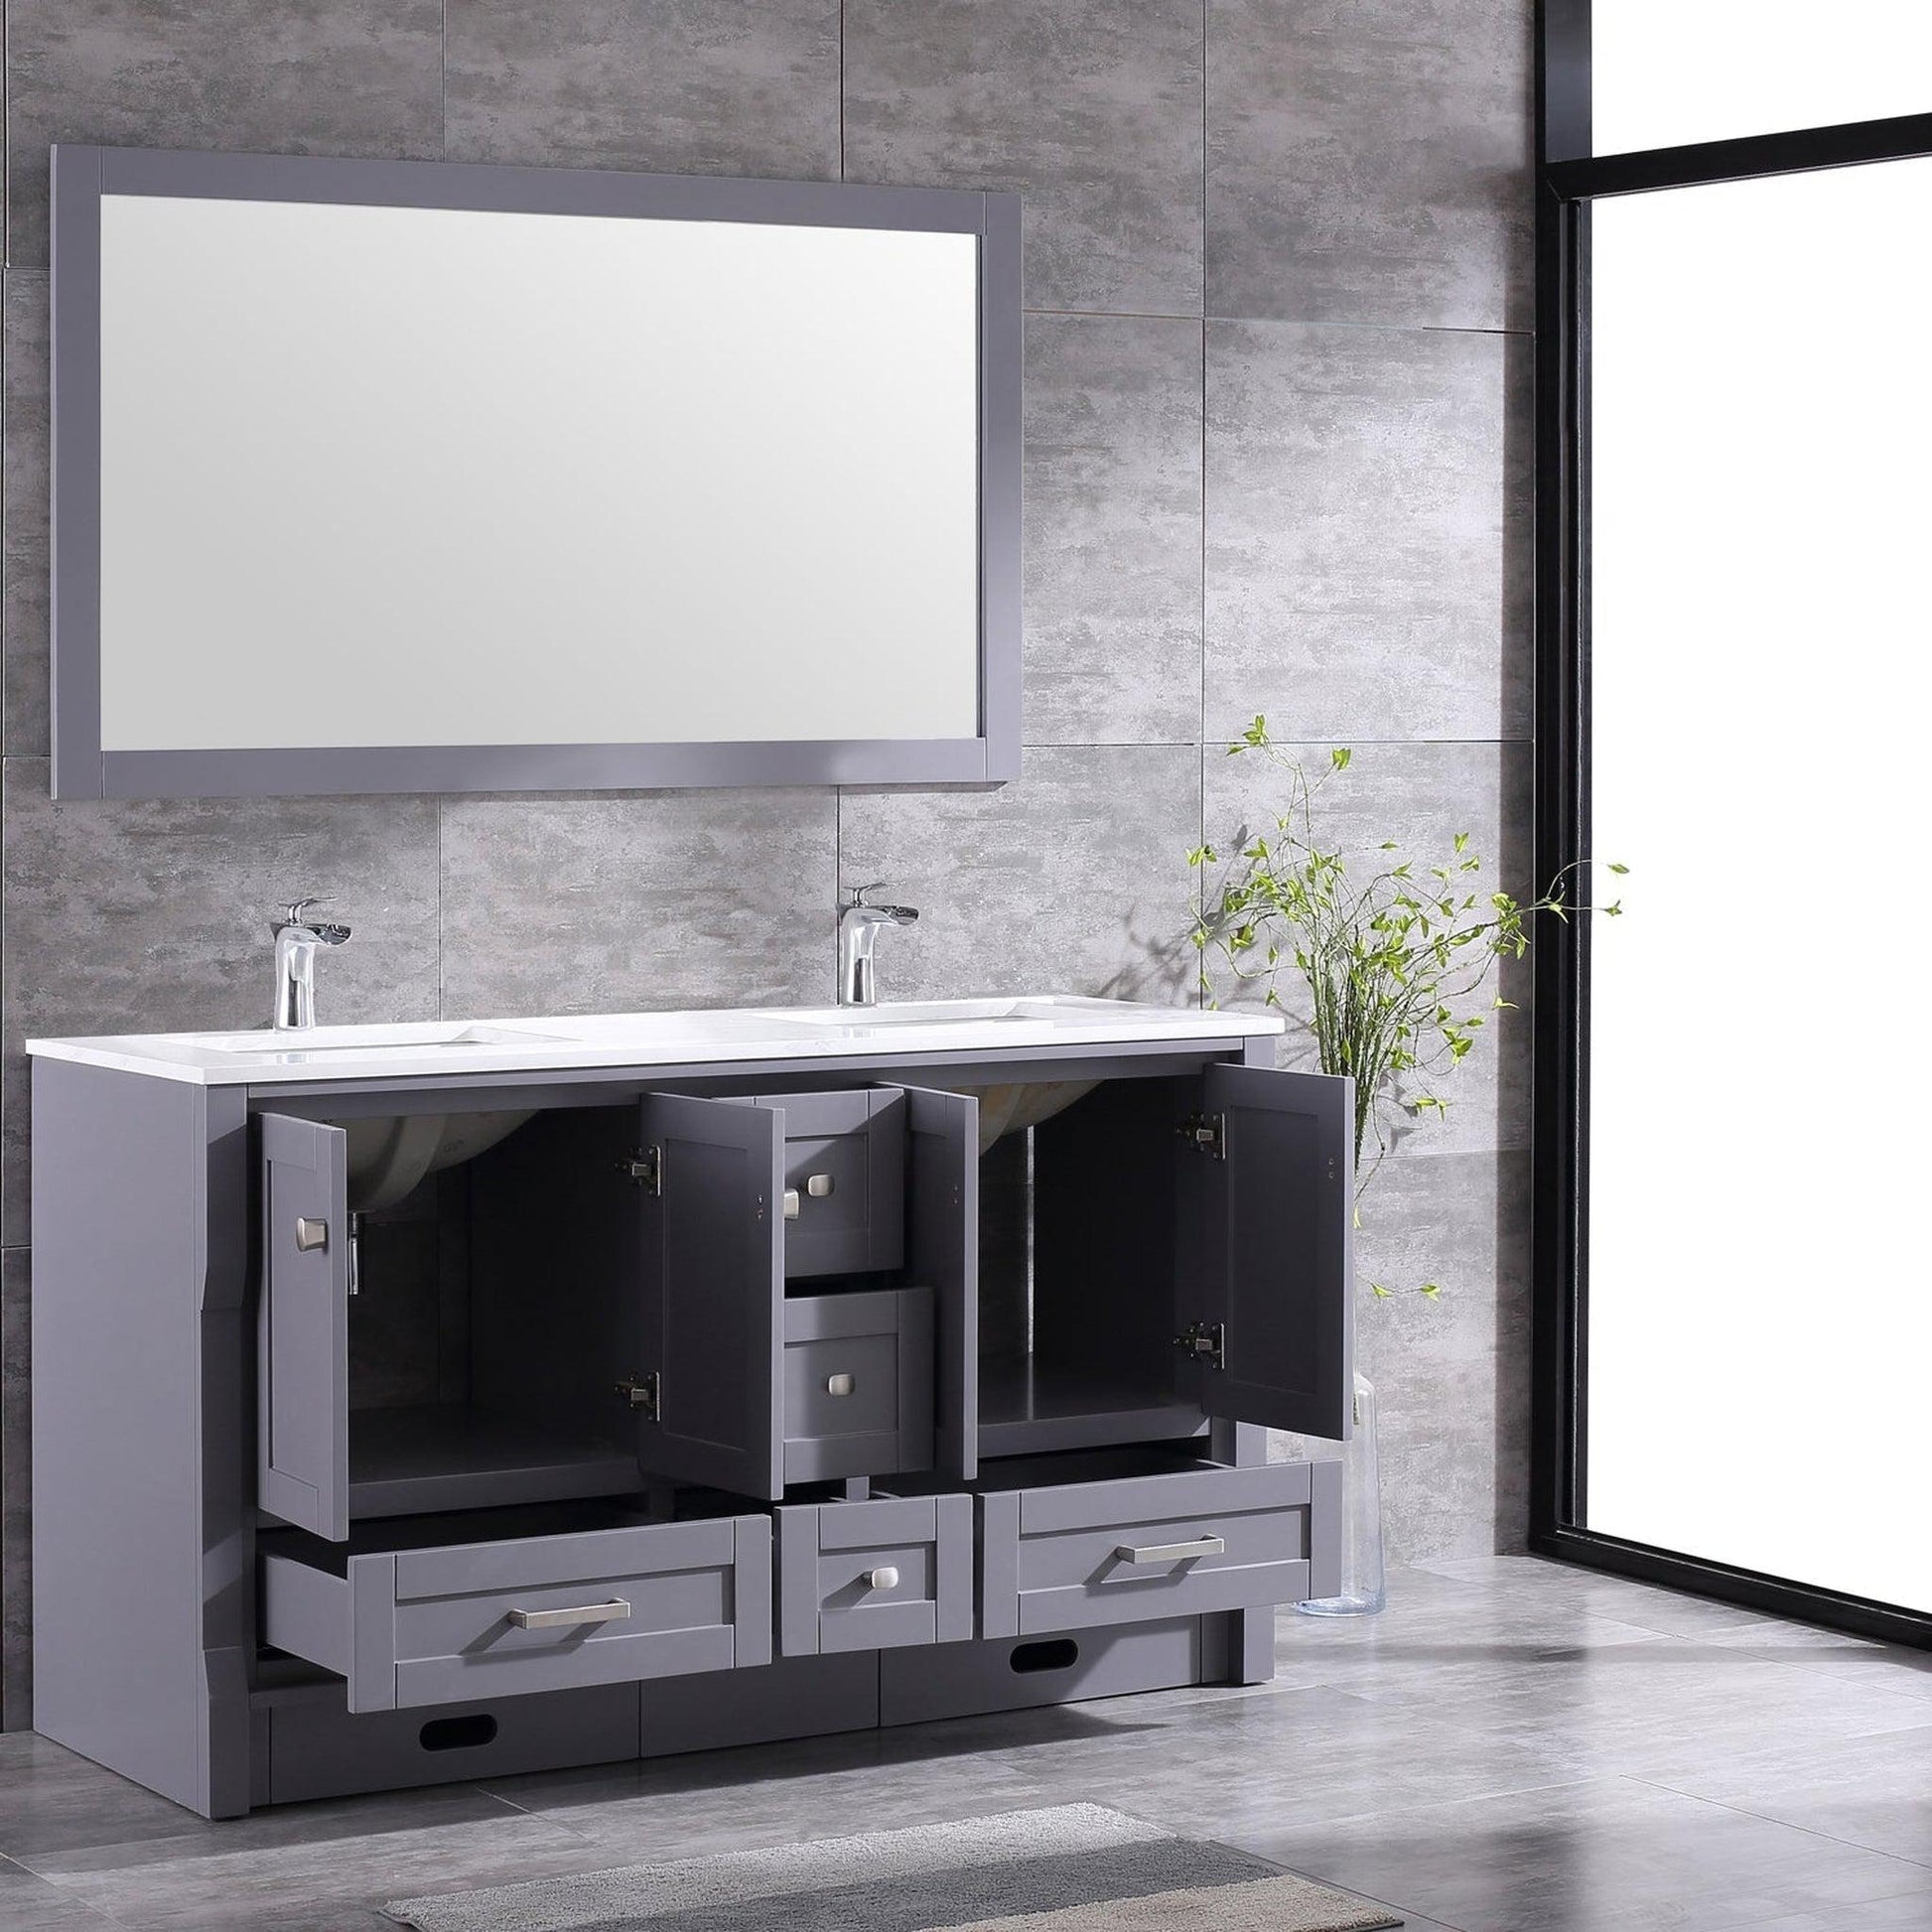 Eviva Booster 60” x 34” Gray Freestanding Bathroom Vanity With White Carrara Marble Countertop and Double Undermount Sink